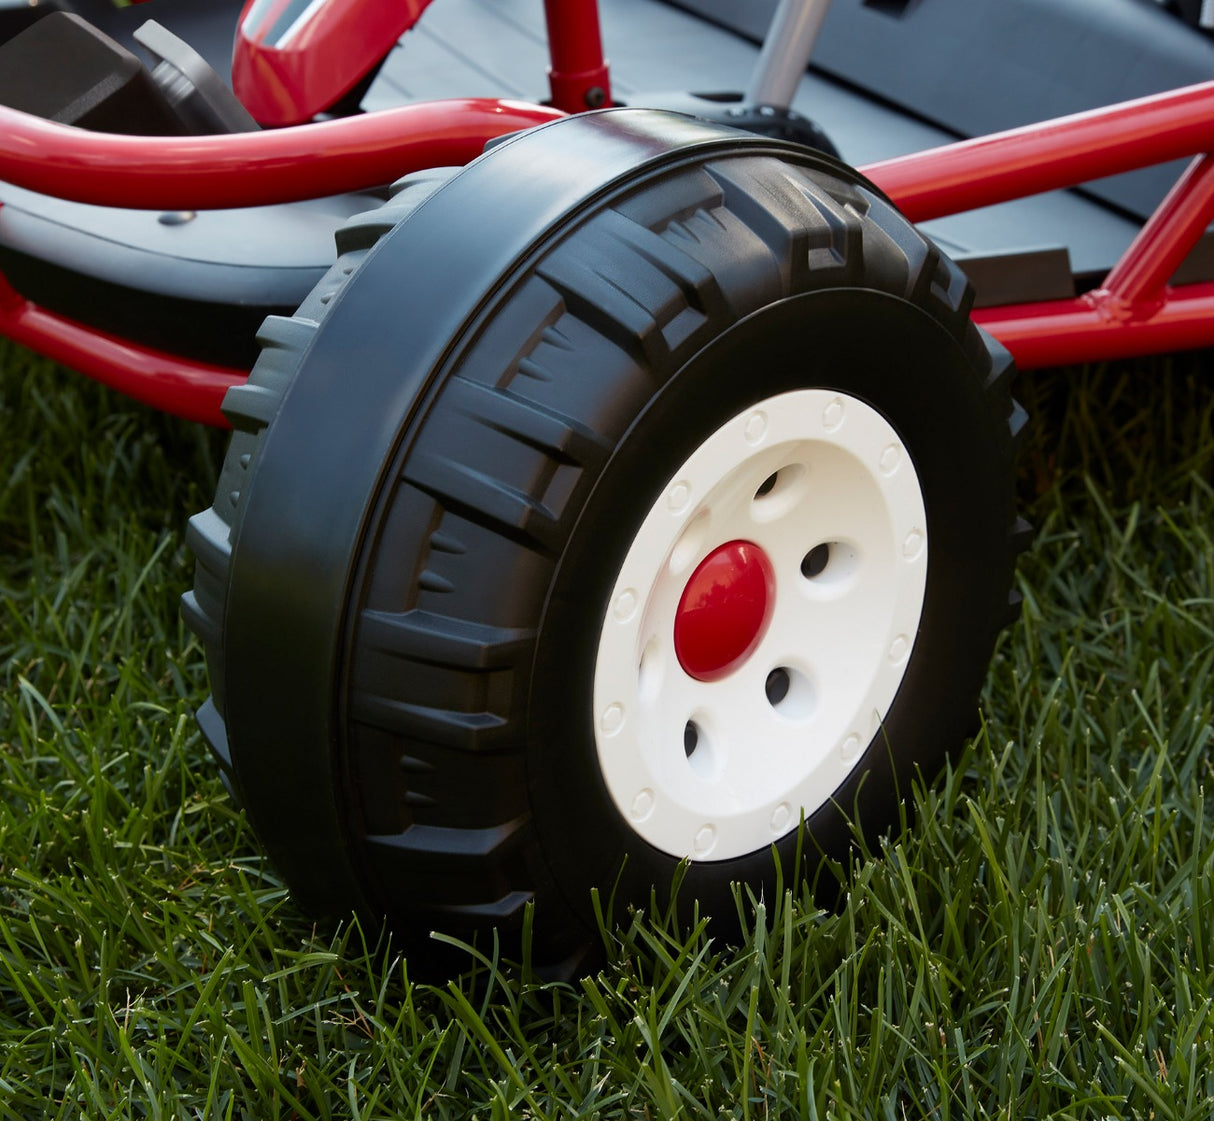 Ultimate Go-Kart for 2's Rugged Tires On Grass